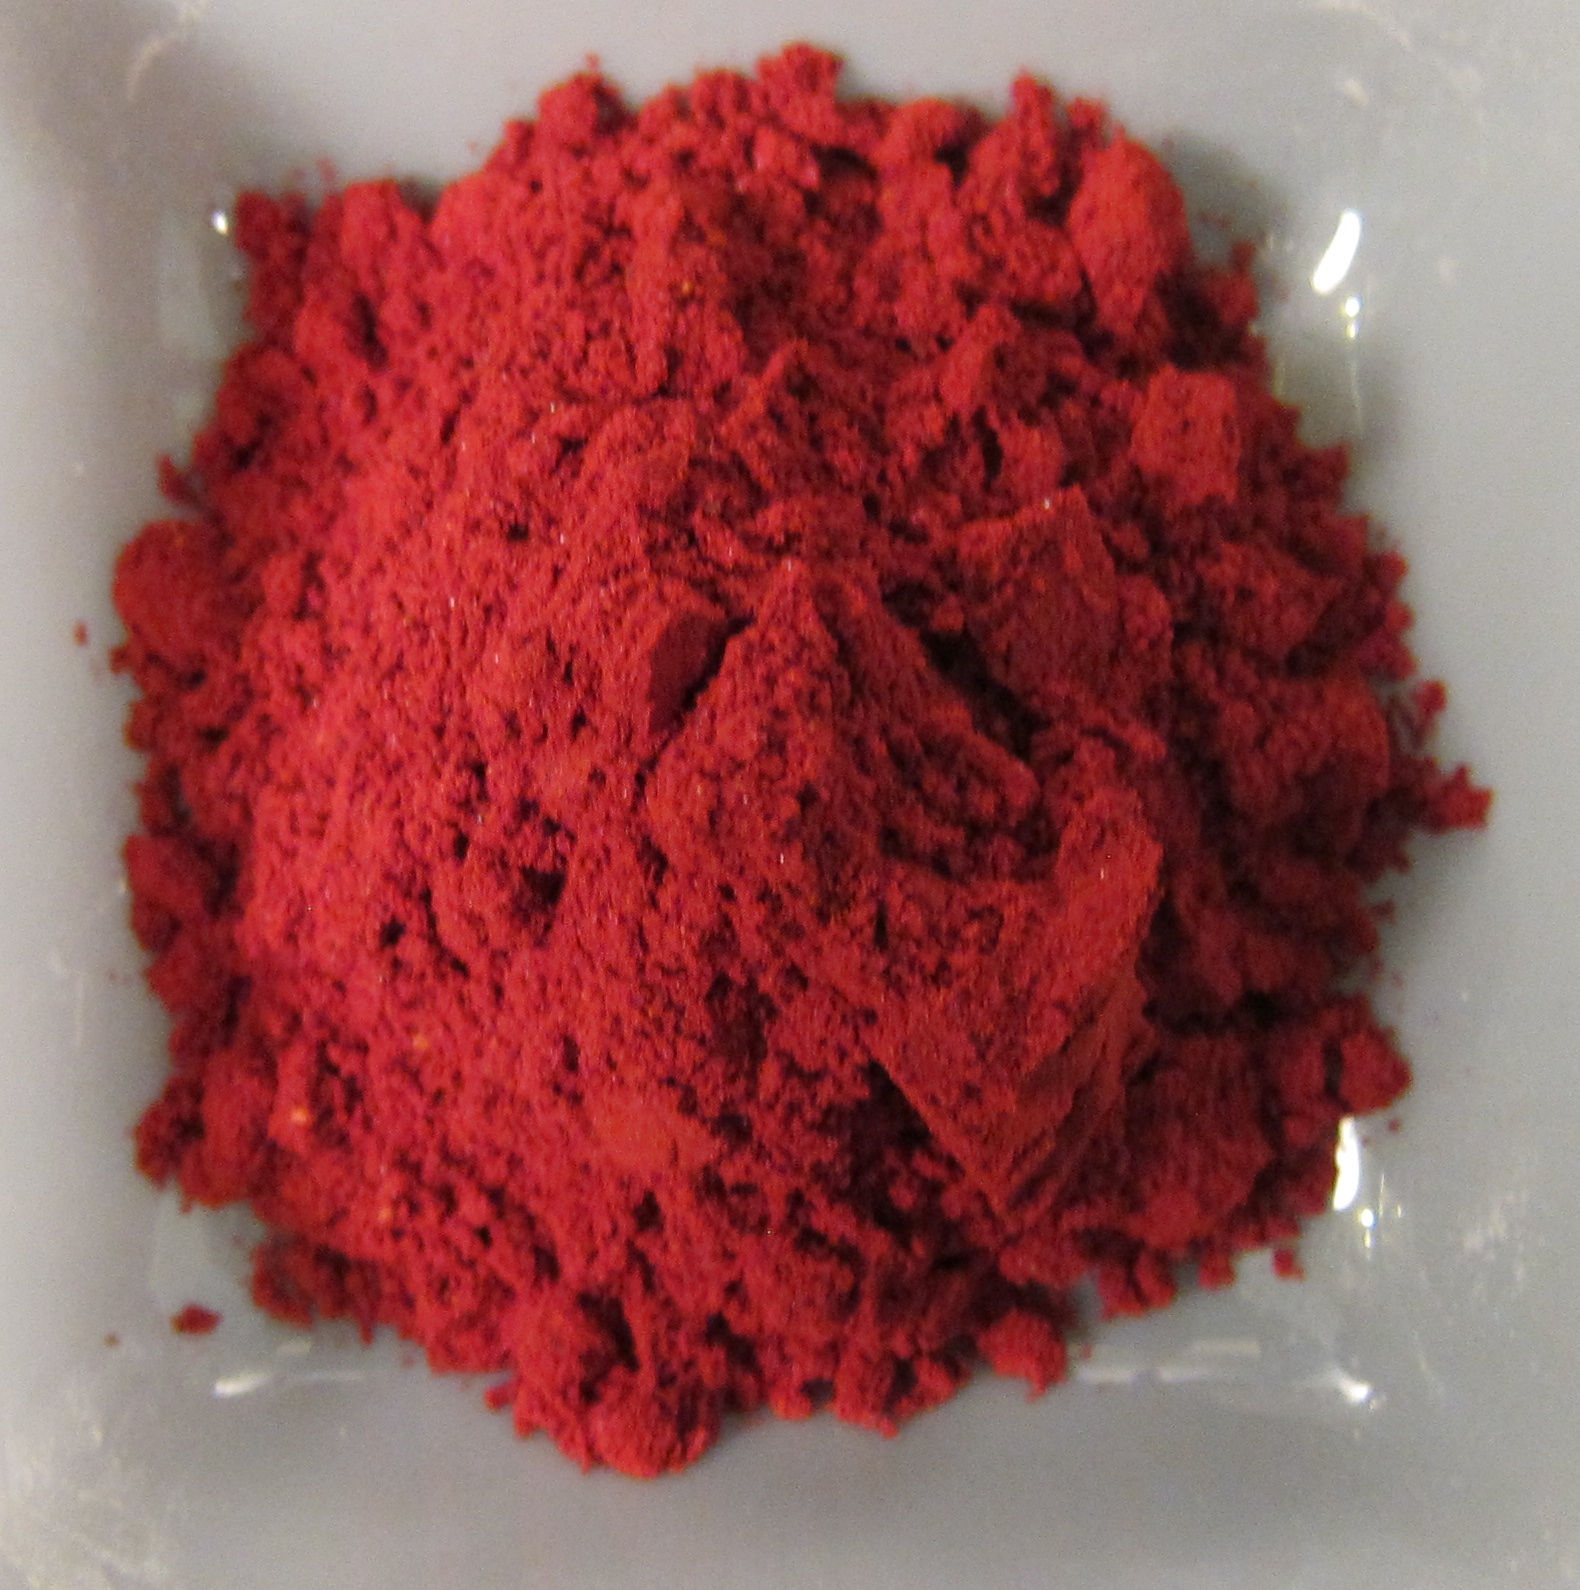 Image result for dragon's blood pigment